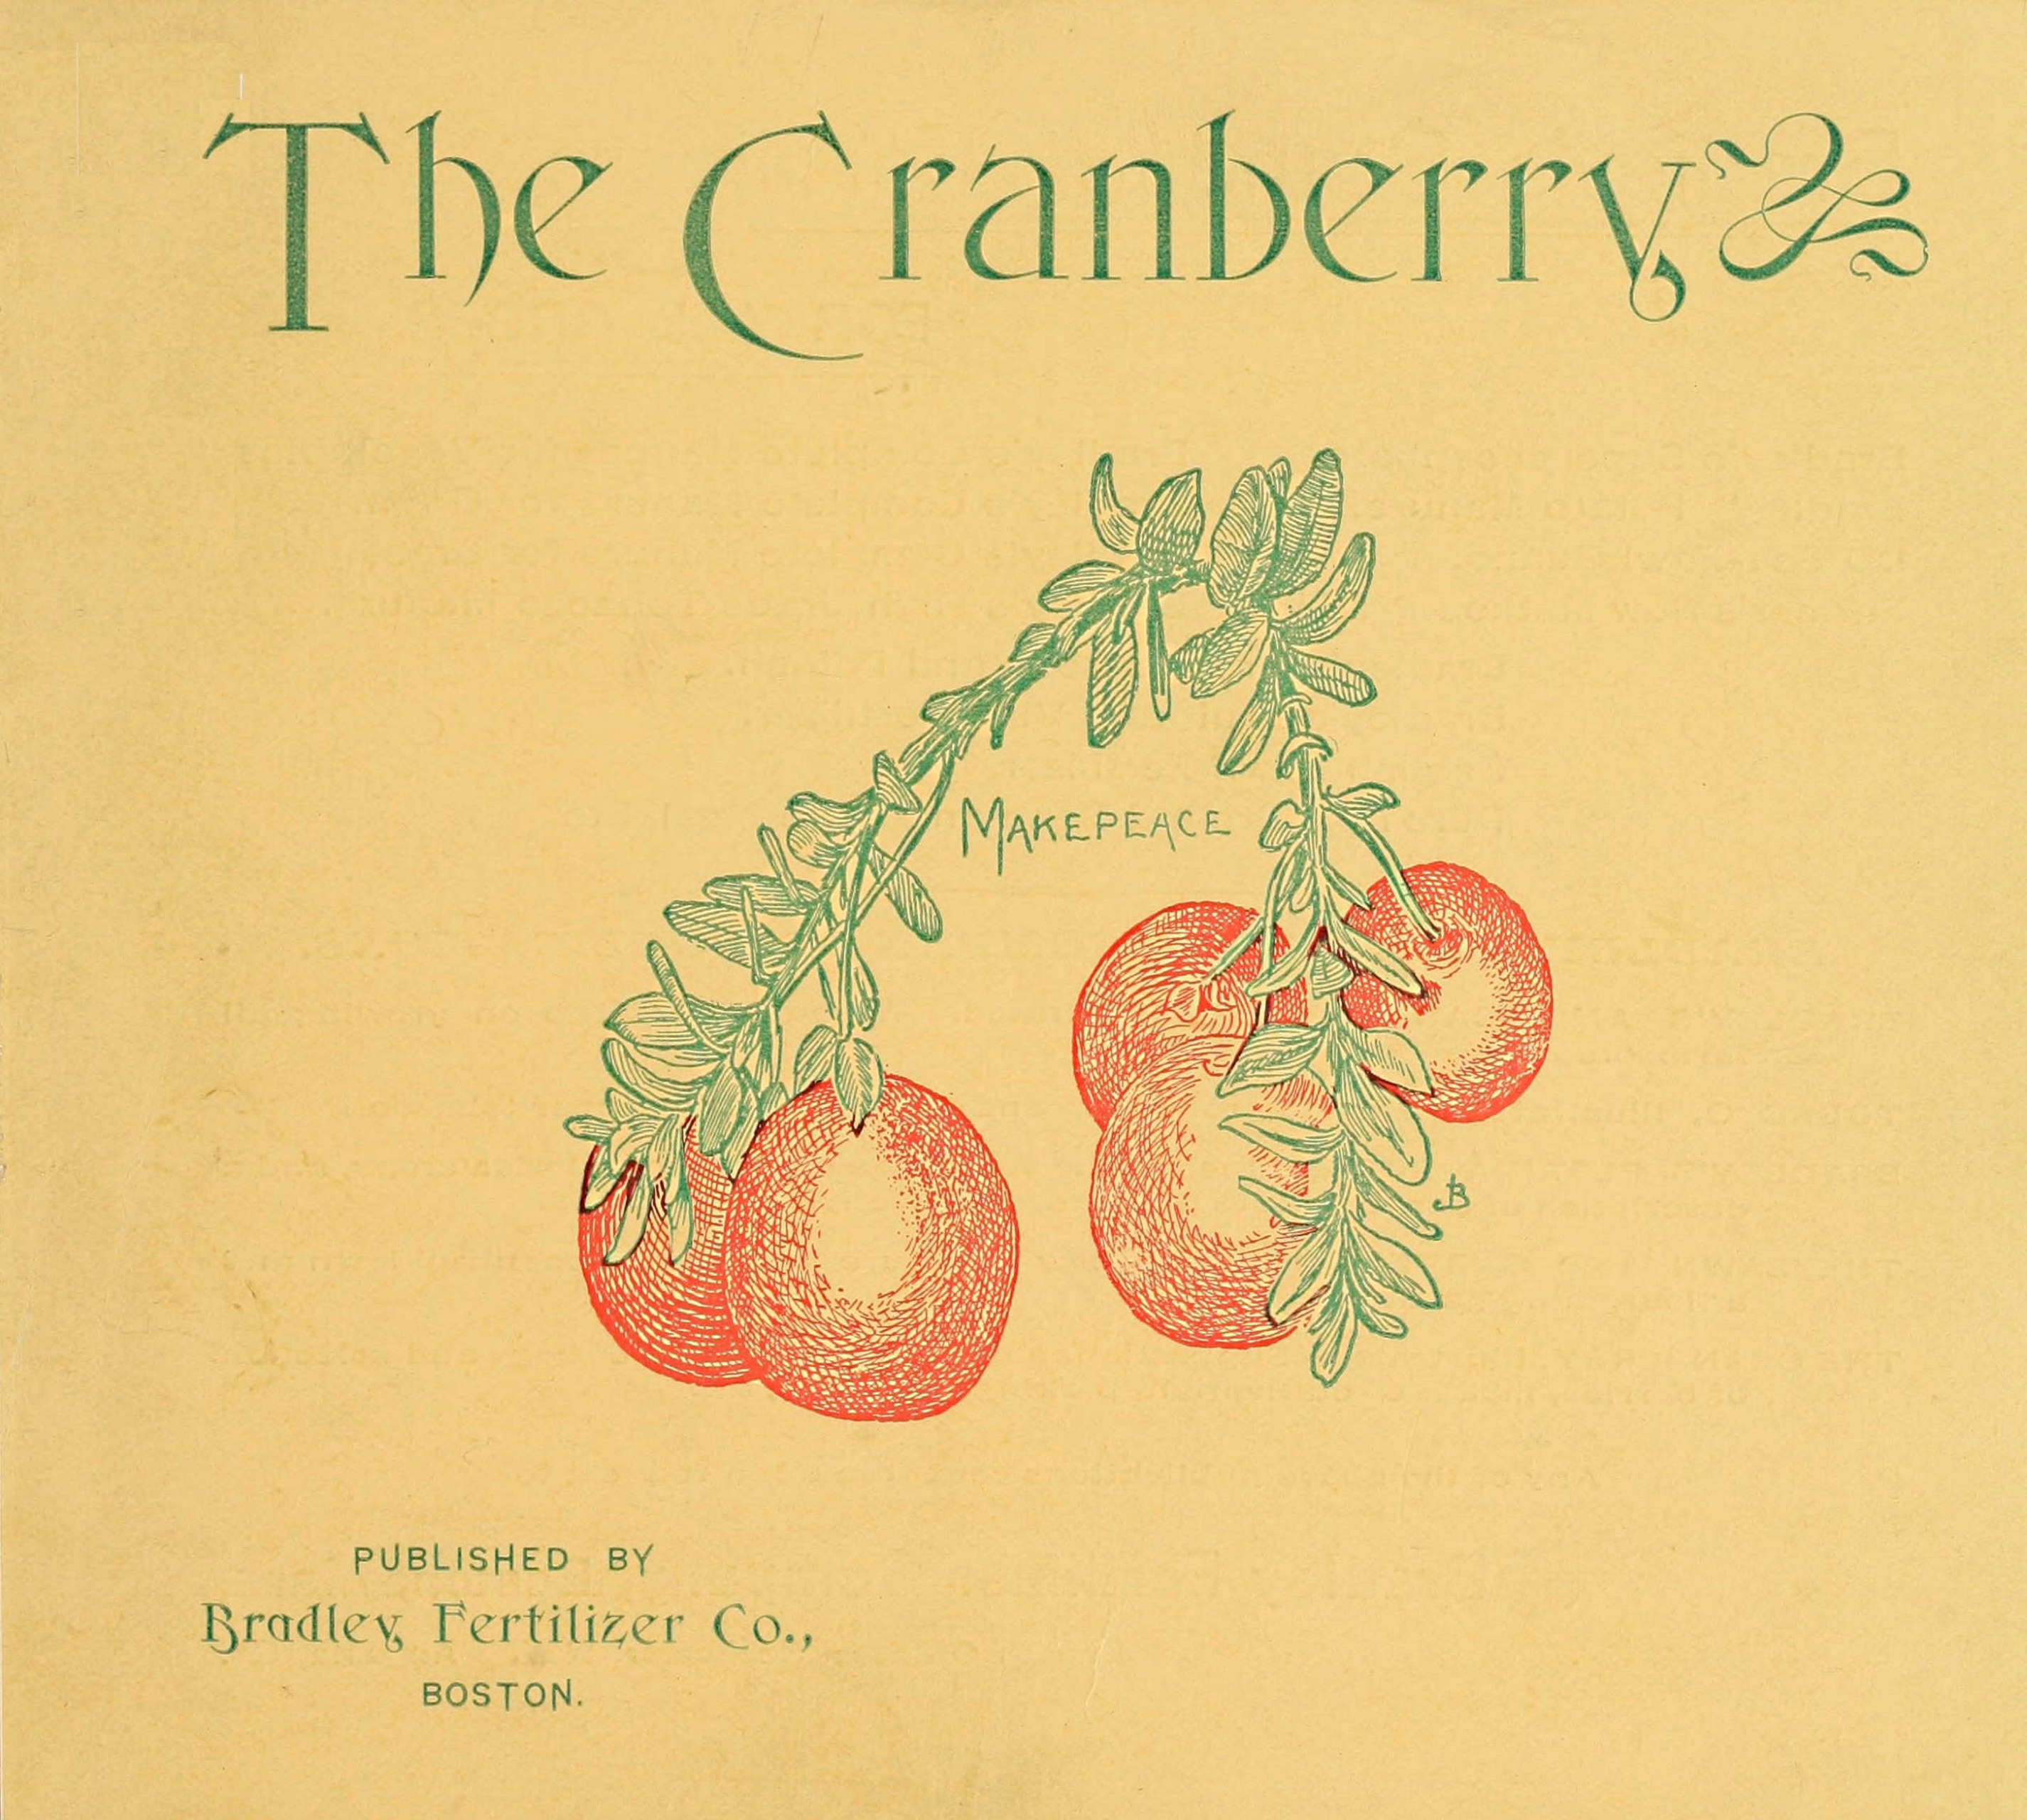 The cranberry